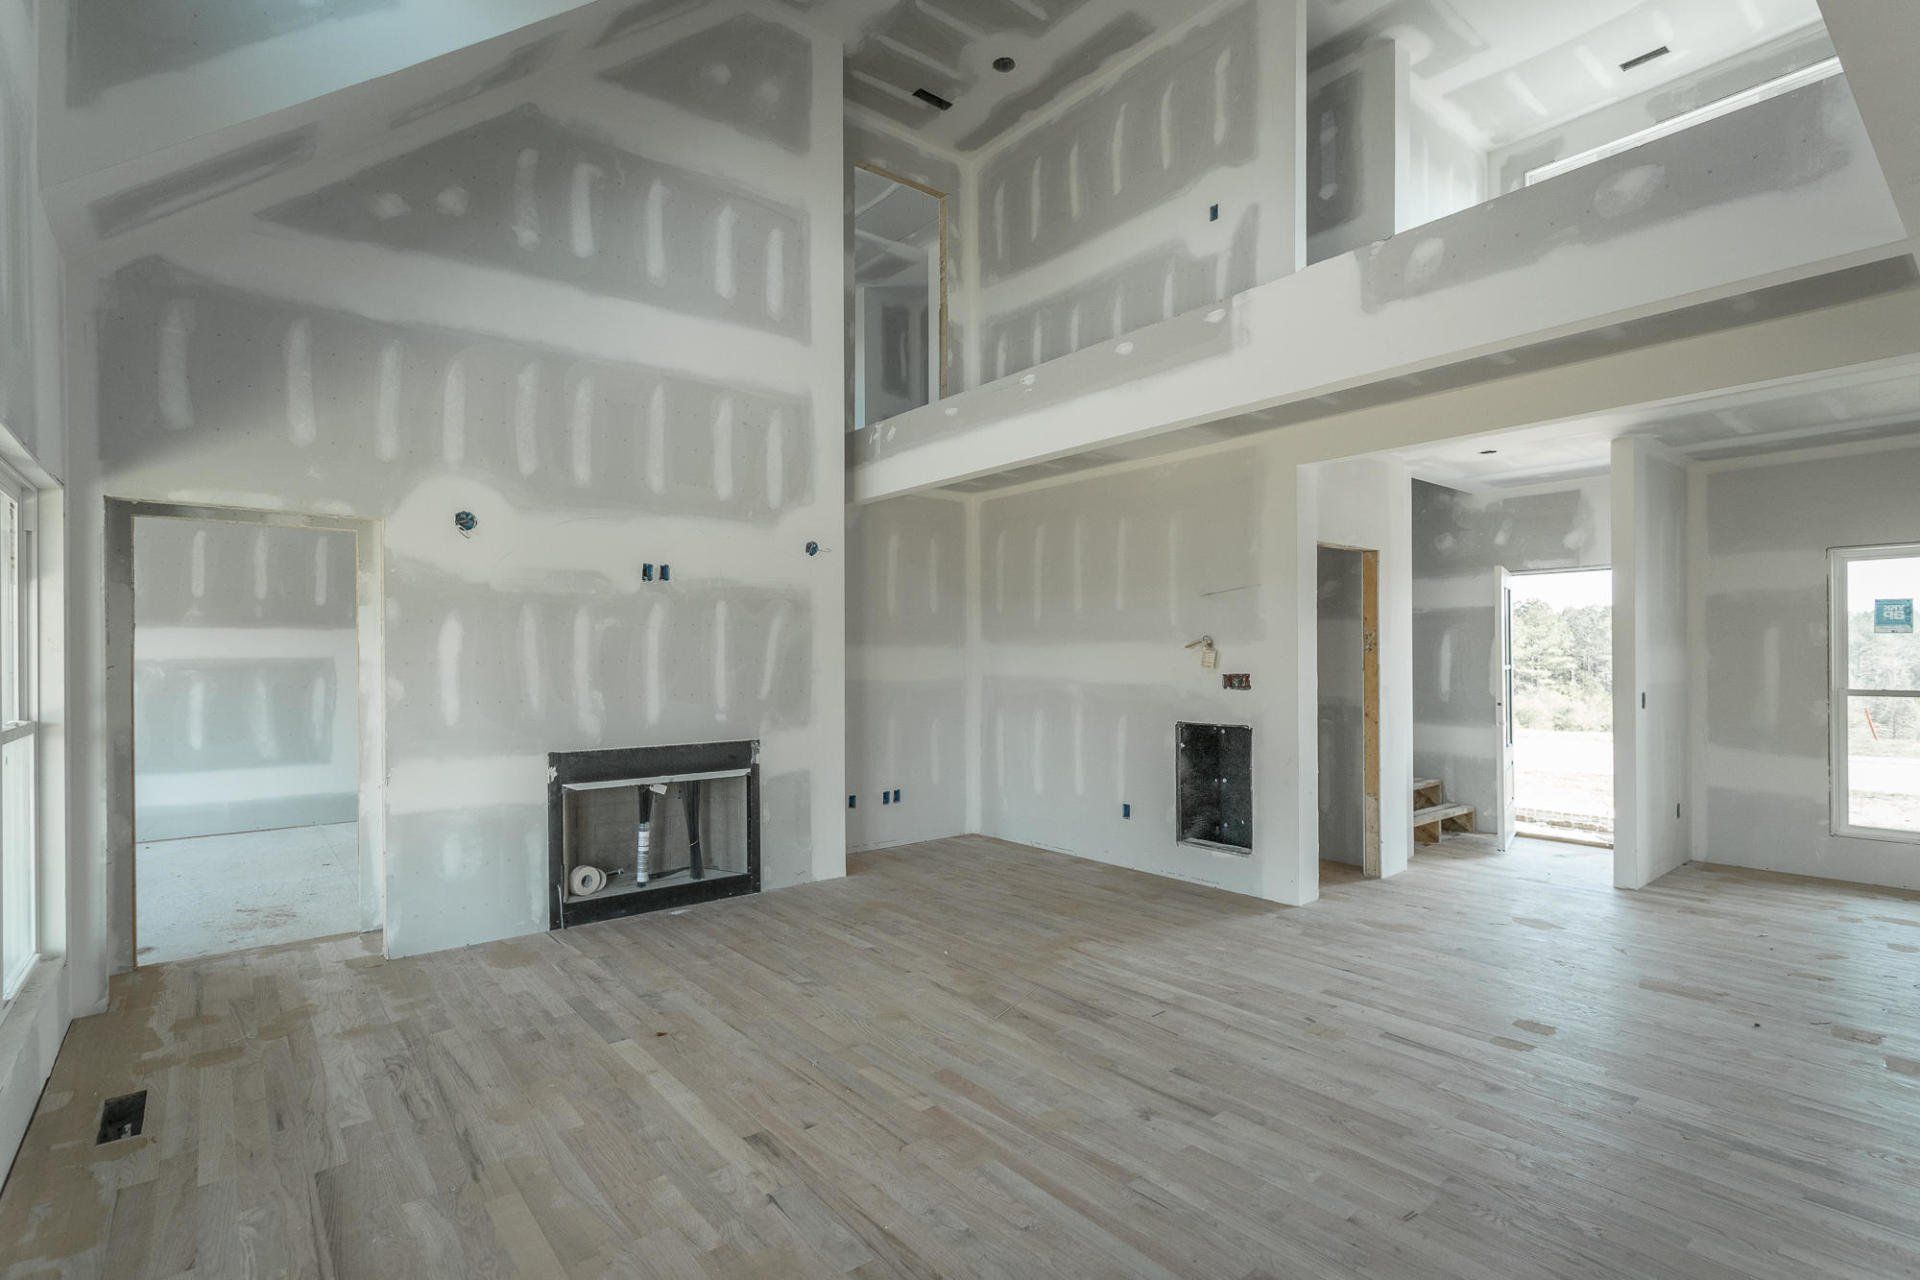 a large empty room in a house under construction with drywall on the walls .